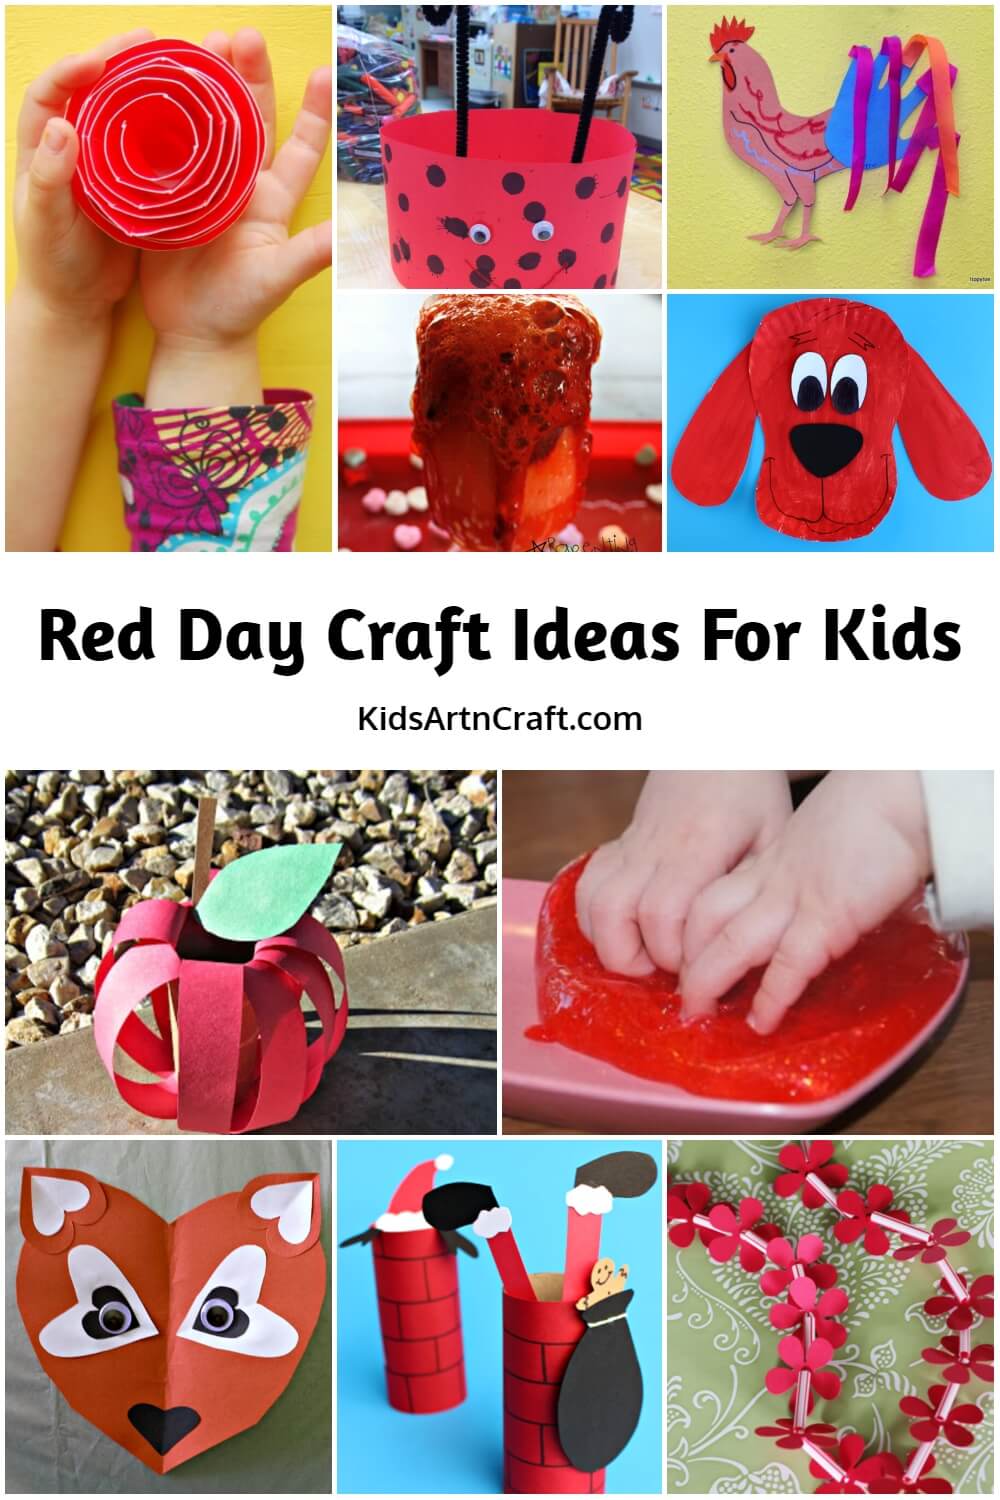 Red Day Craft Ideas For Kids